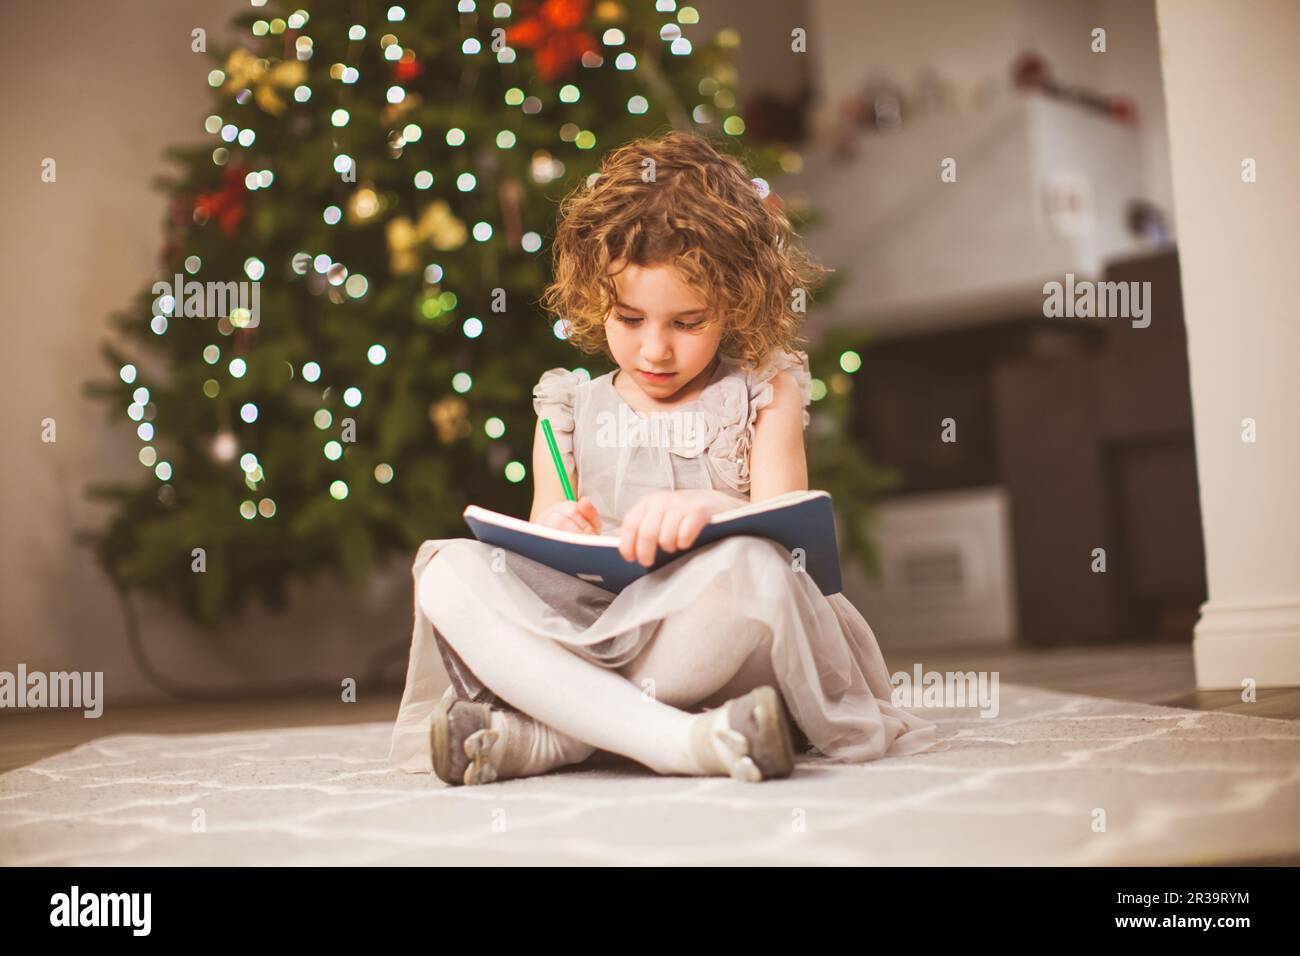 Preschool girl sitting next to festive tree and drawing Stock Photo